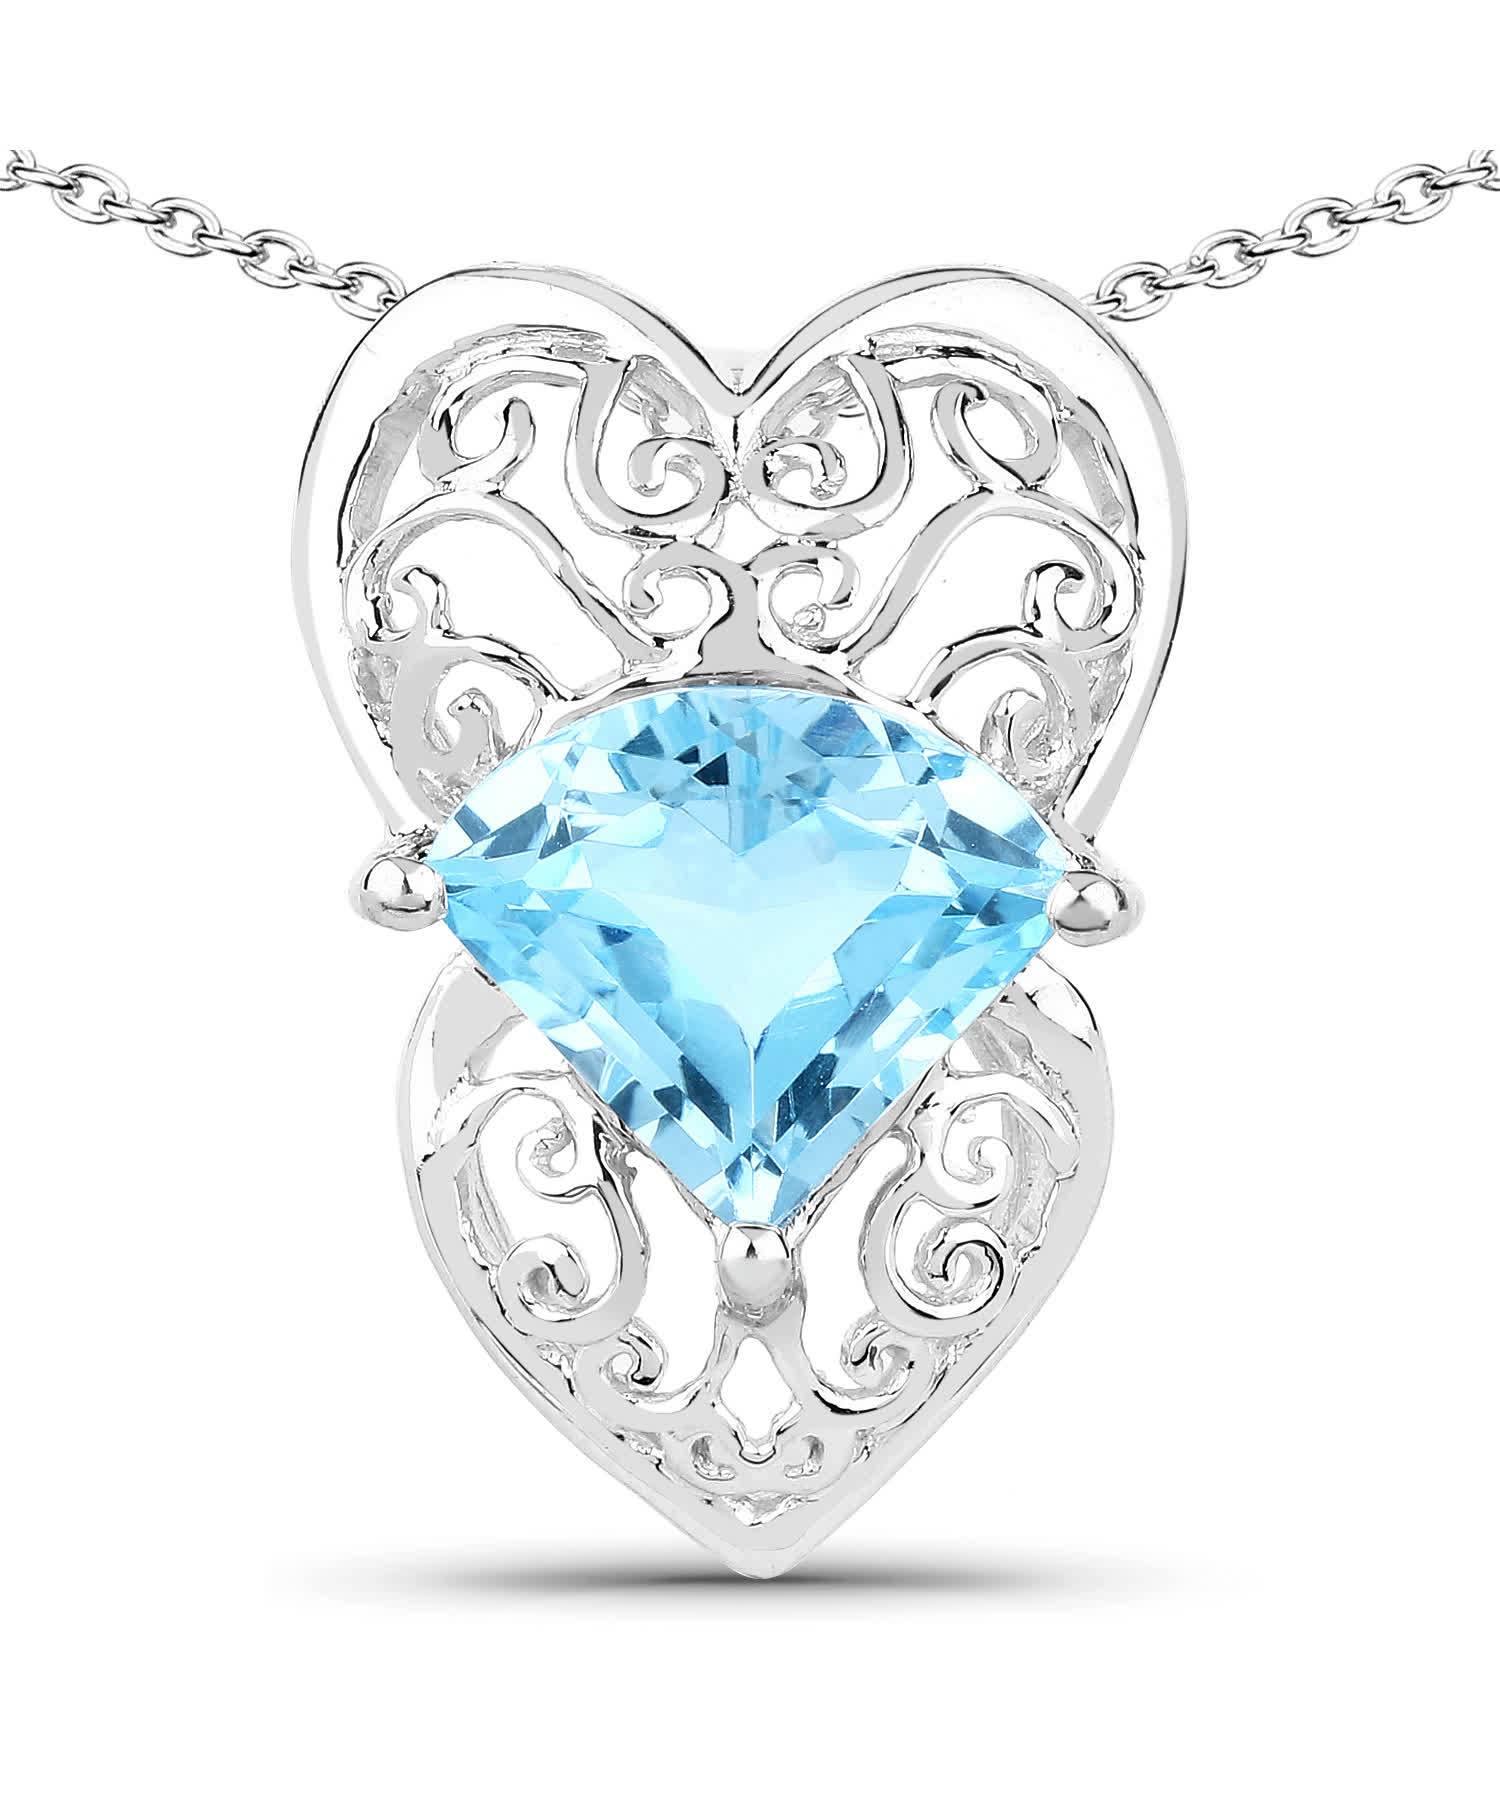 4.65ctw Natural Swiss Blue Topaz Rhodium Plated 925 Sterling Silver Heart Pendant With Chain View 1